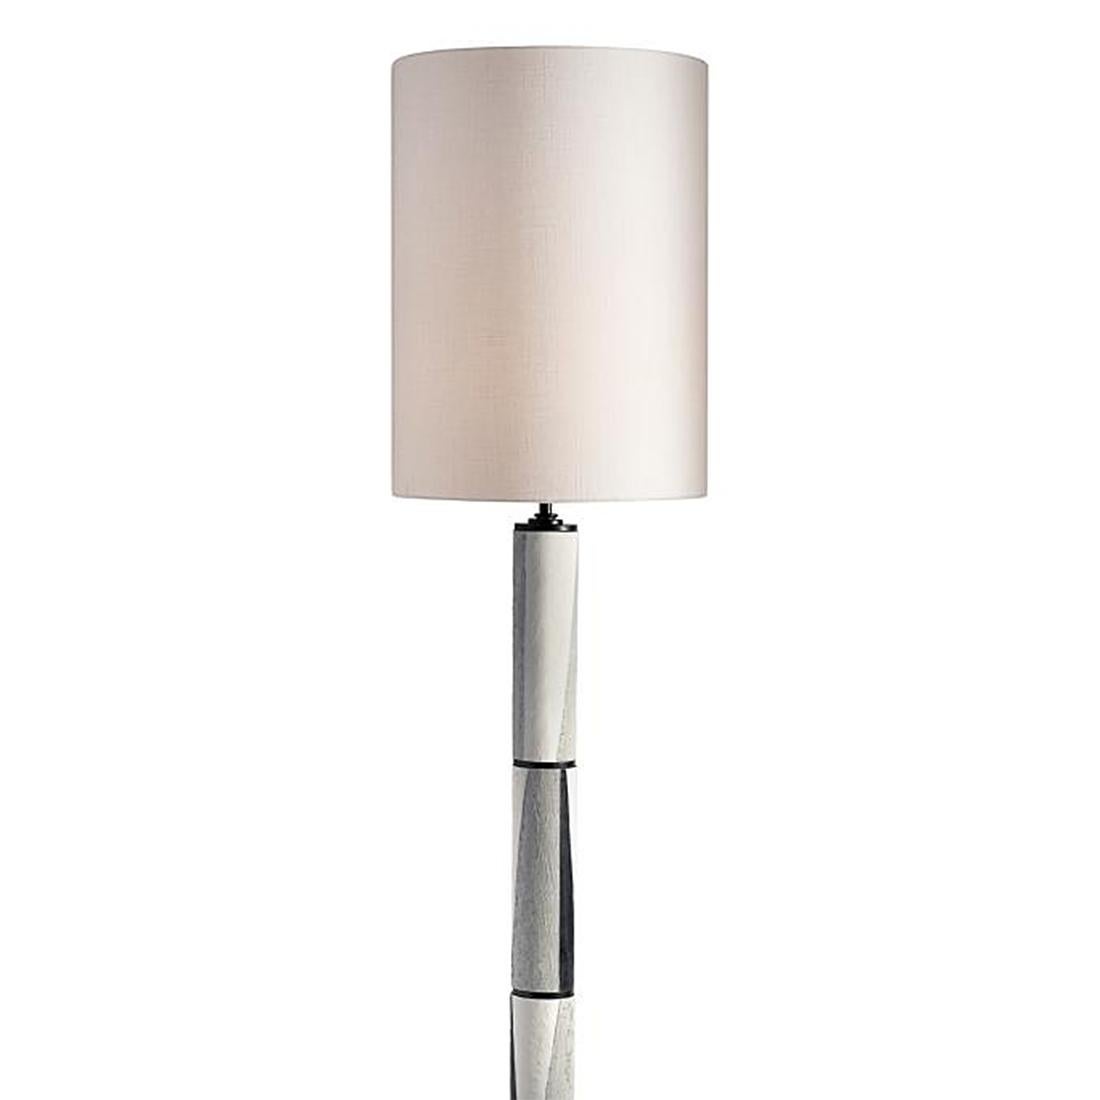 Floor lamp Theo with earthenware base
with linen shade included. 1 bulb, lamp holder
type E27, max 40 watt. Bulb not included.
Also available in table lamp Theo.